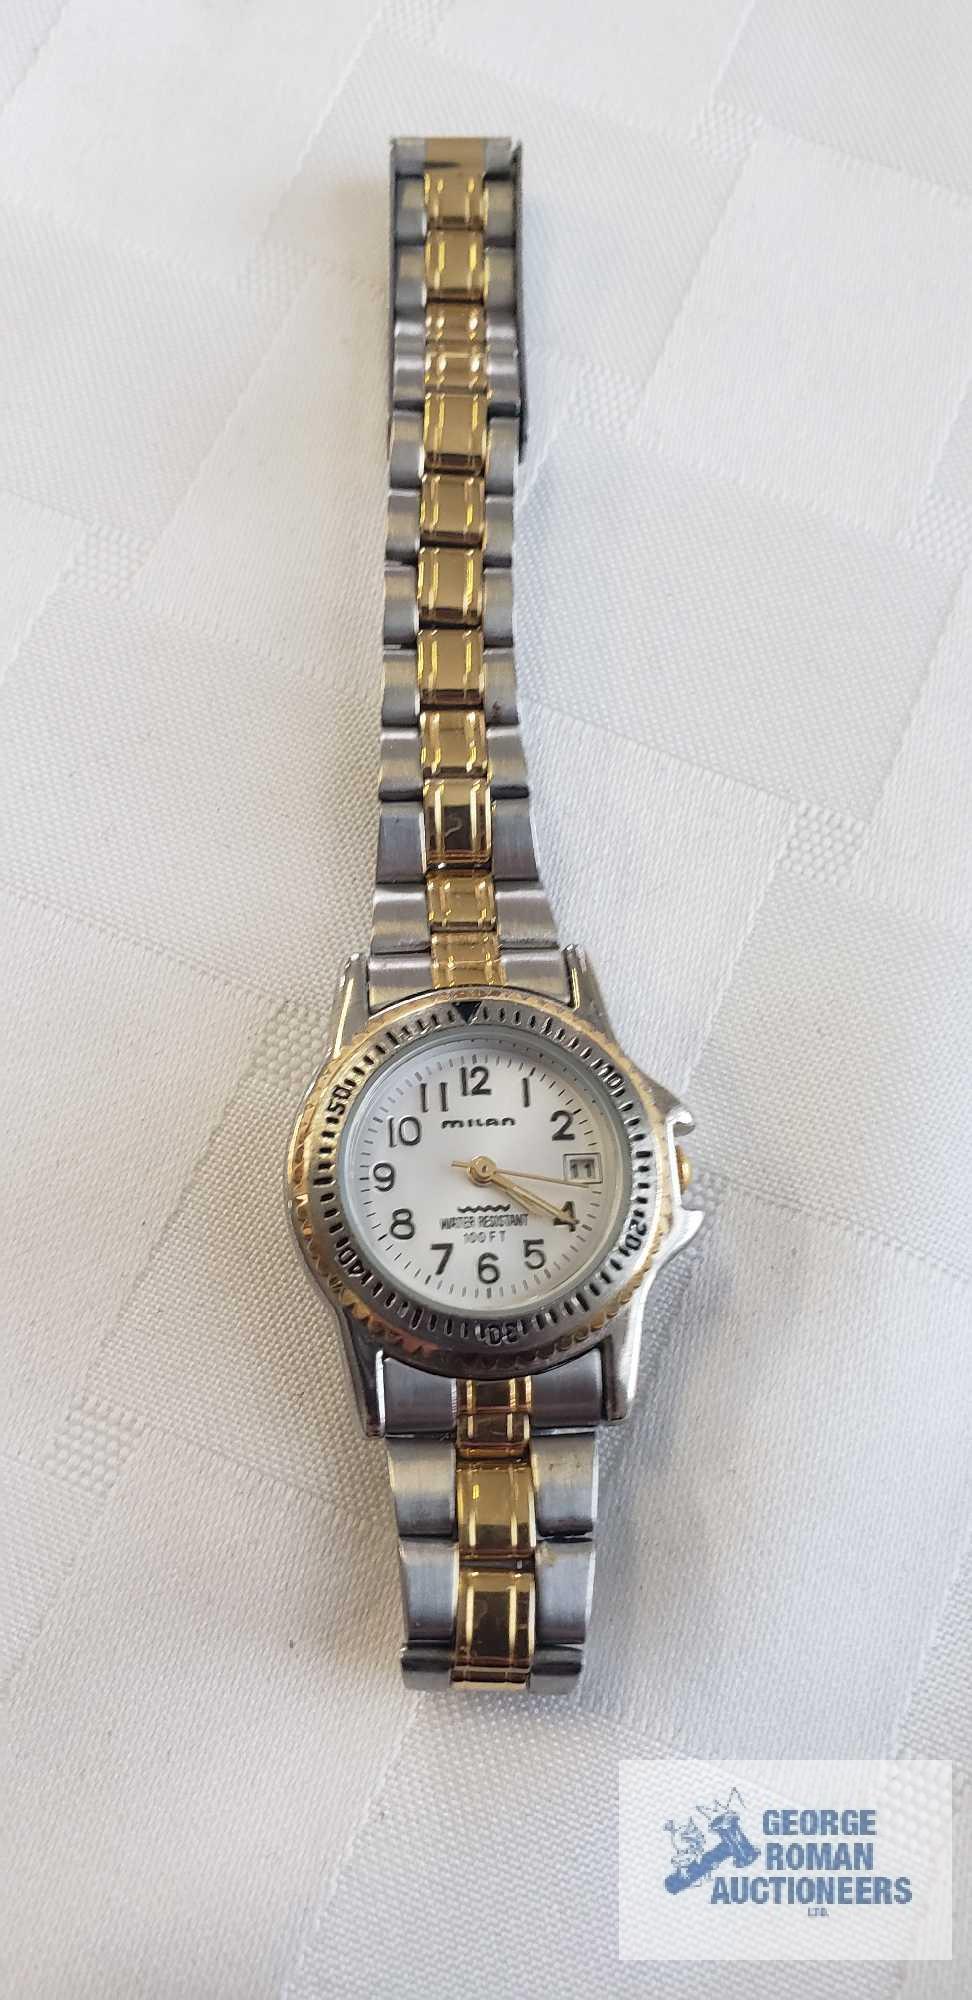 Milan water resistant silver and gold tone watch and other silver and gold tone watch